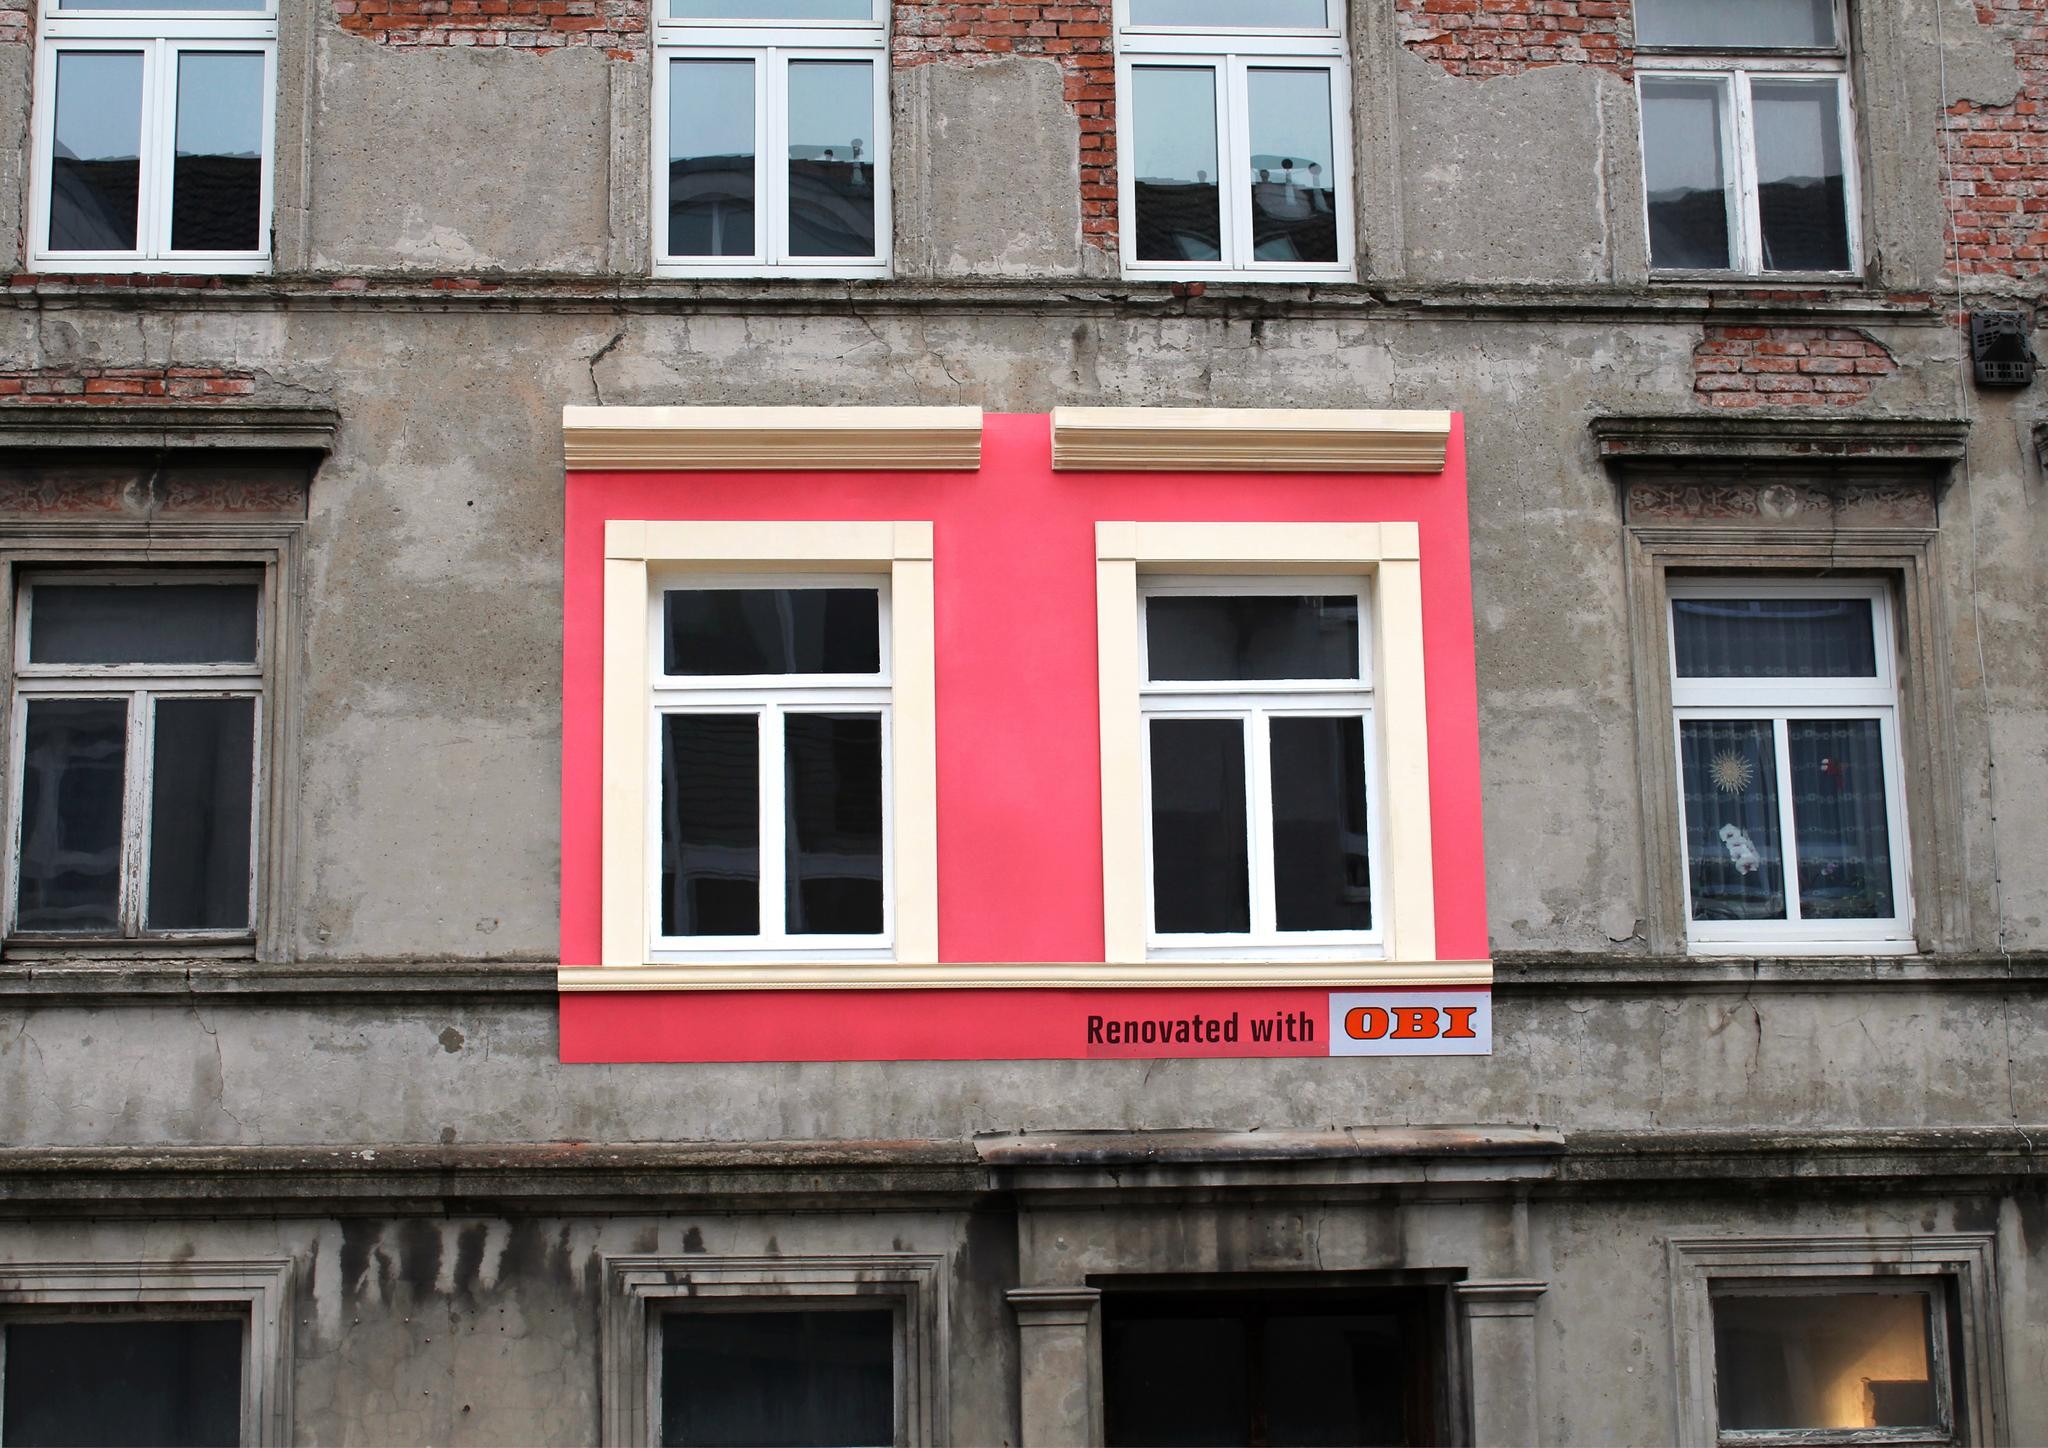 RENOVATED BILLBOARDS - PINK HOUSE